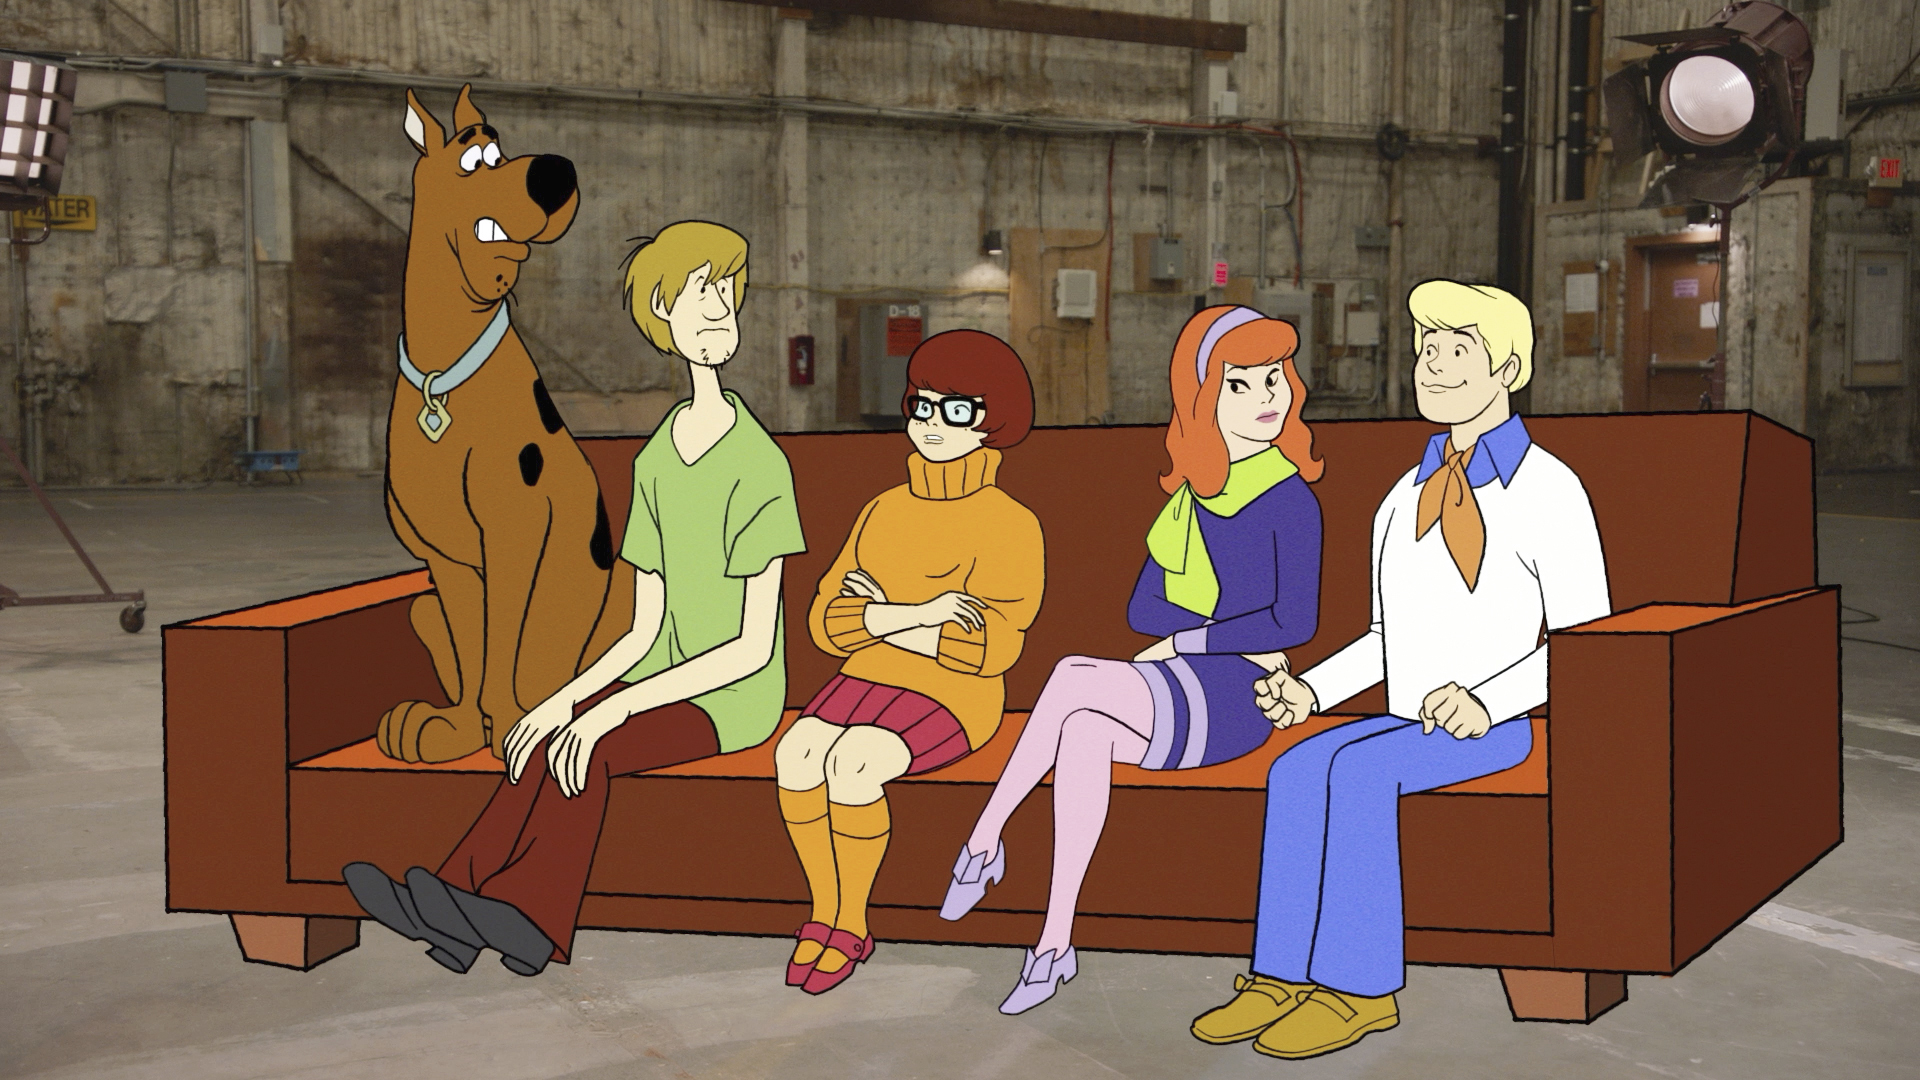 danijela zivkovic recommends Pictures Of The Scooby Doo Gang